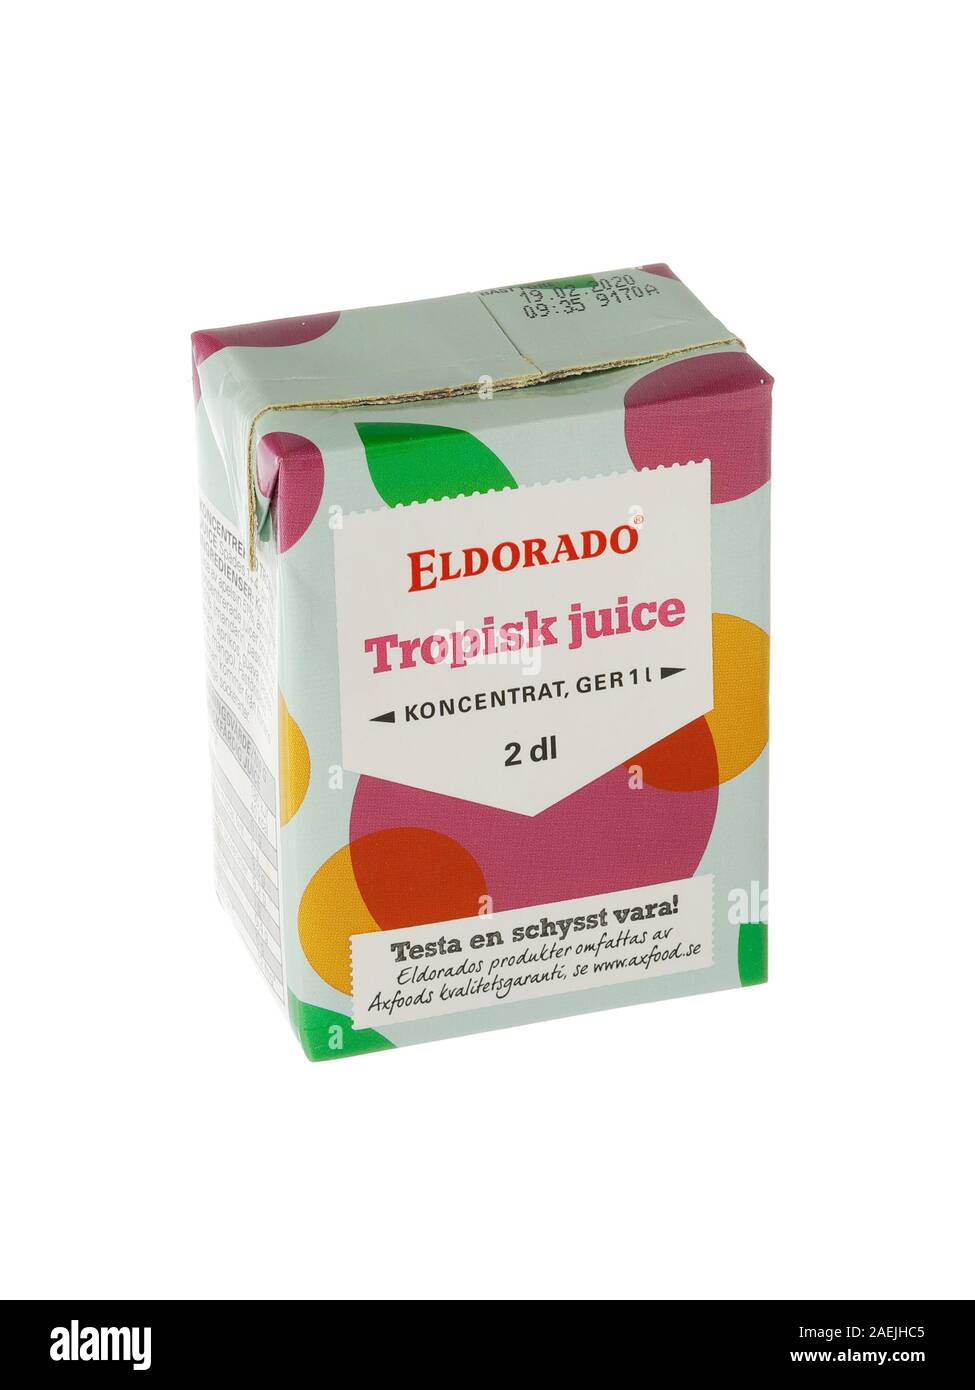 Stockholm, Sweden - December 2, 2019: A package of 2 dl of concentrated tropical juice with Axfood's brand Eldorado isolated on white background. Stock Photo